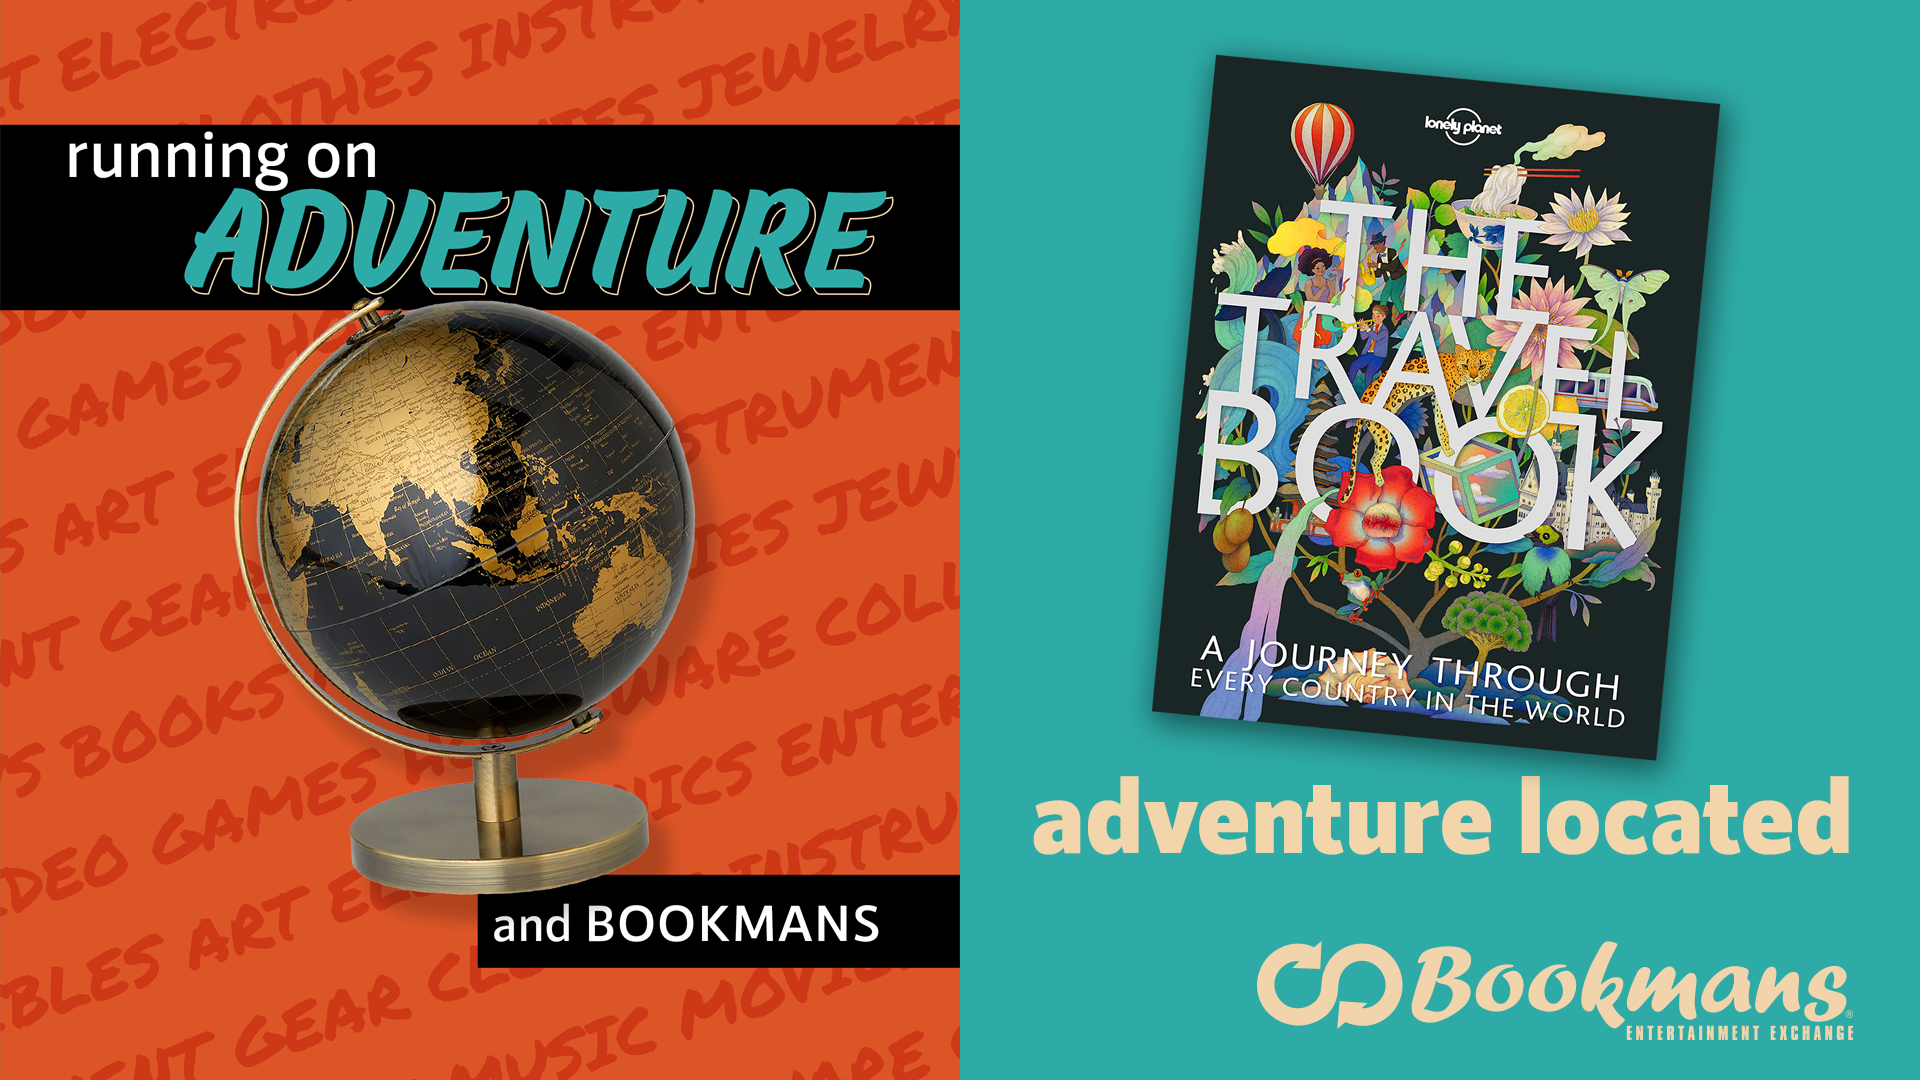 august at bookmans means adventure